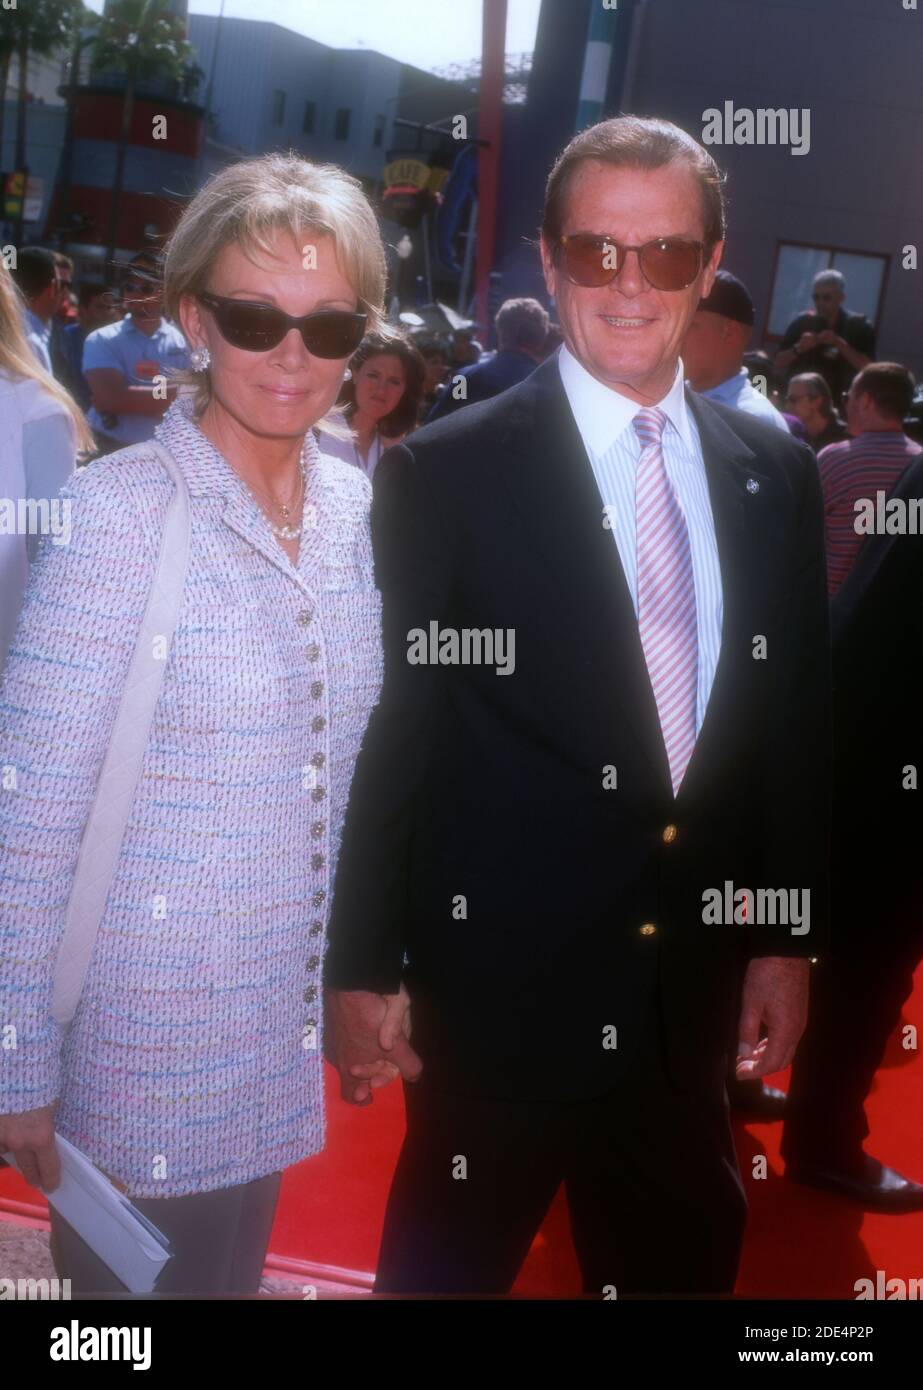 Universal City, California, USA 20th April 1996 Actress Luisa Mattioli and husband actor Roger Moore attend Universal Pictures' 'The Quest' on April 20, 1996 at Cineplex Odeon Universal City Cinemas in Universal City, California, USA. Photo by Barry King/Alamy Stock Photo Stock Photo